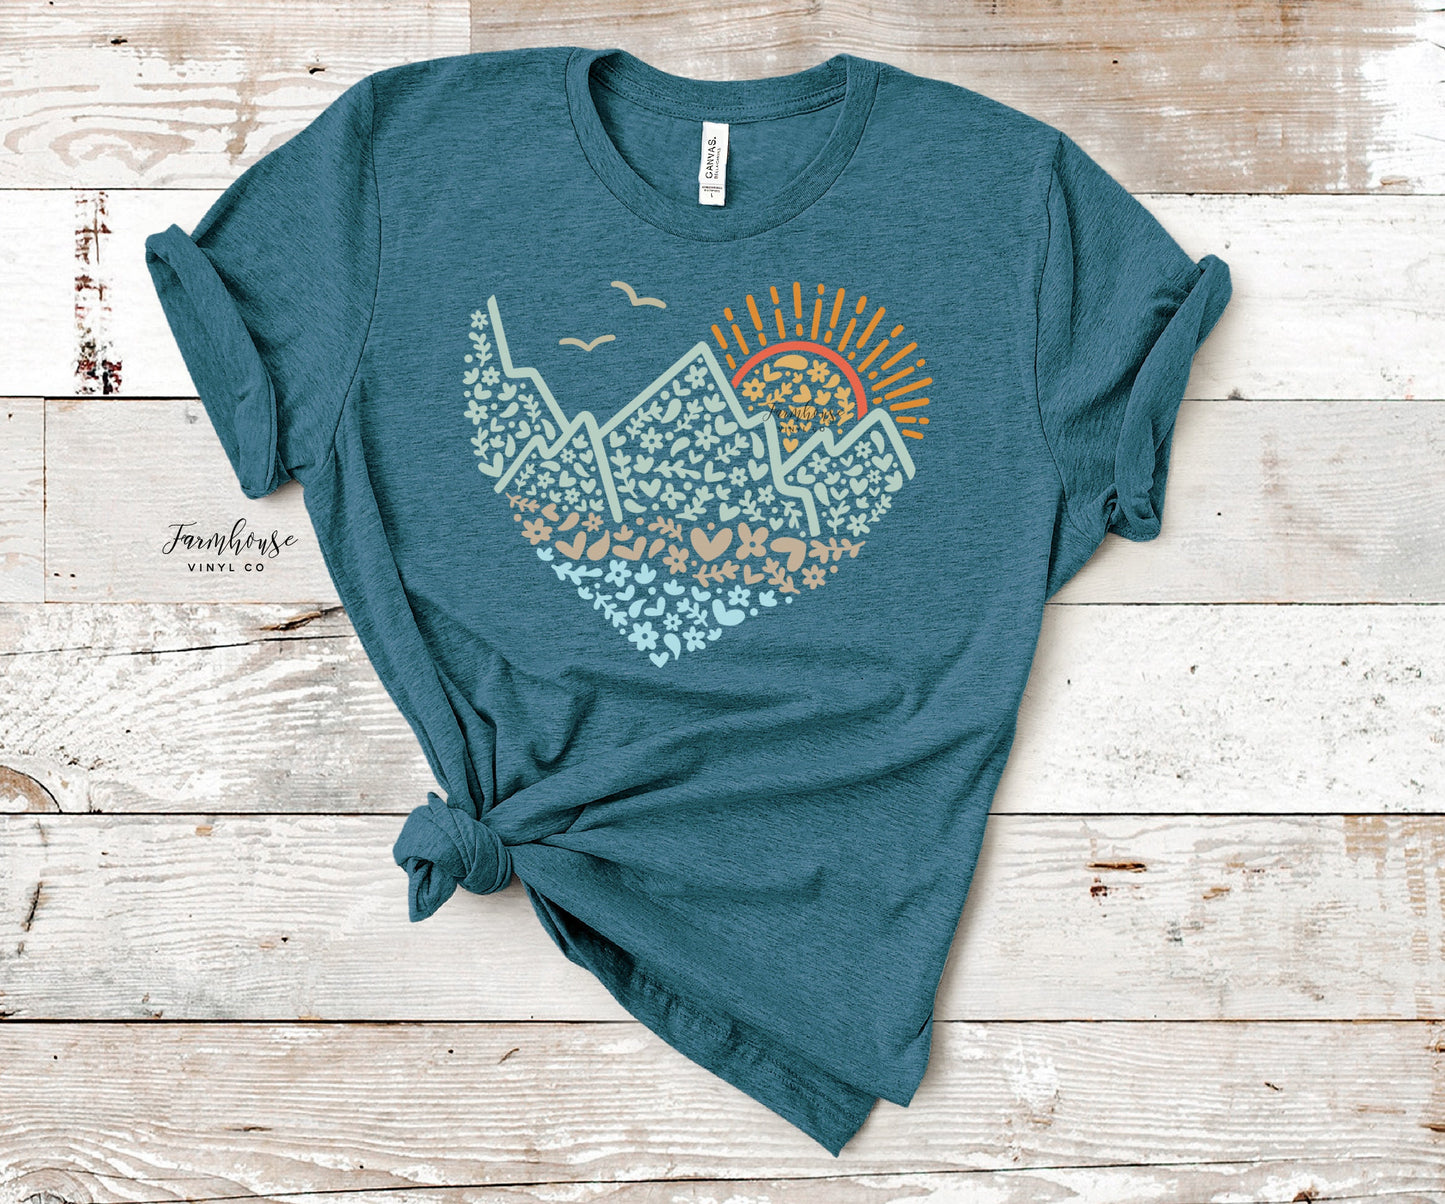 Find Your Wild Mountain Outdoor Hiking Camp Unisex Shirt / Camping Shirt / Hiking Gear / Mens Shirts / Outdoor Explorer / Get Outside Tees - Farmhouse Vinyl Co